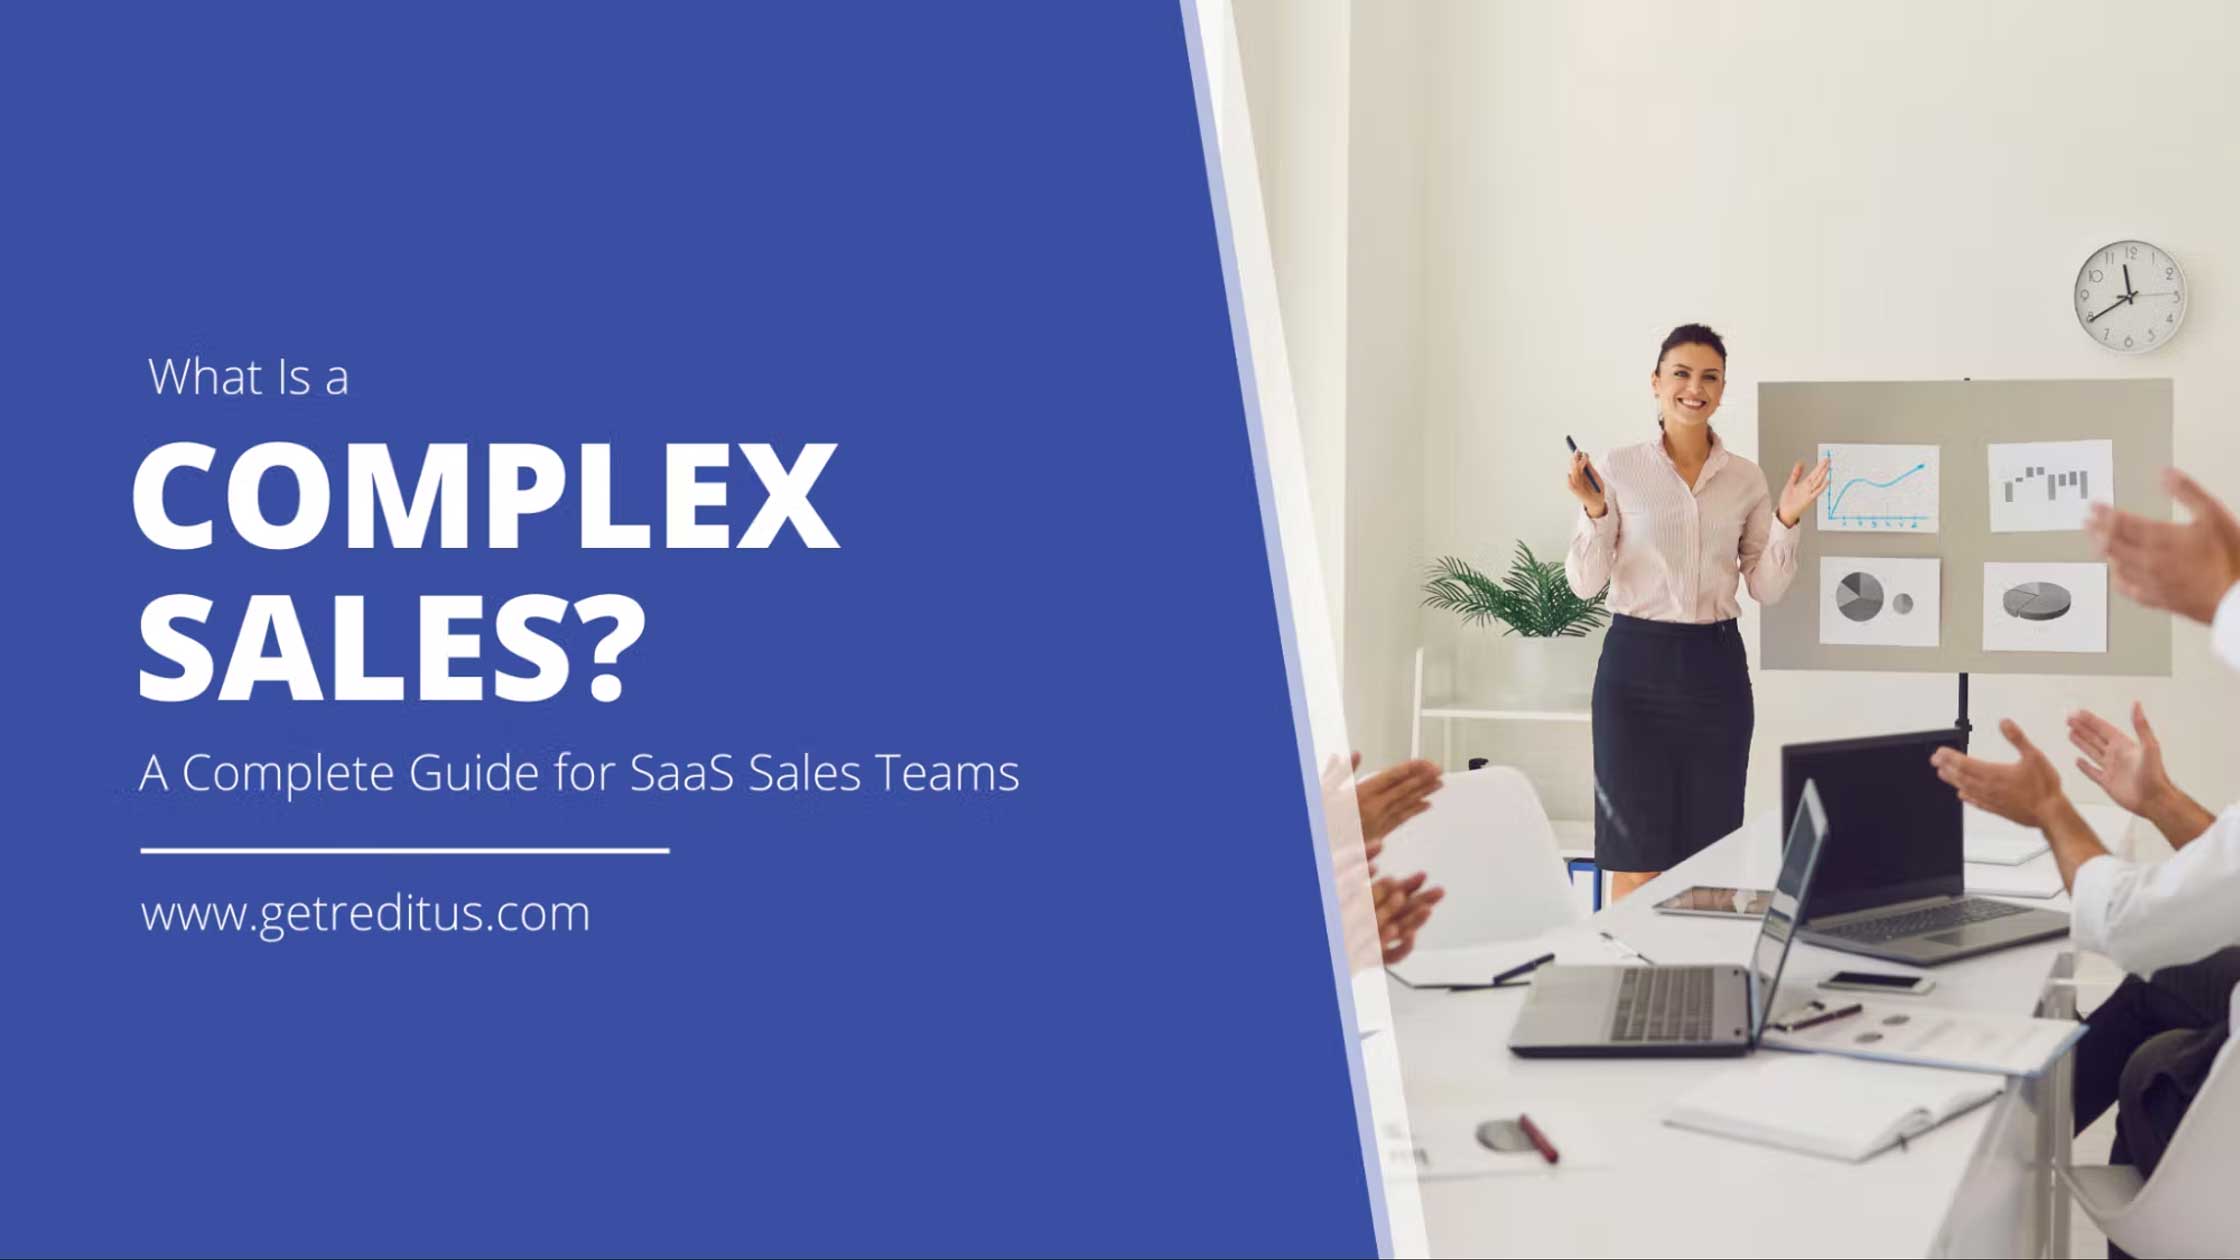 What Is a Complex Sale? A Complete Guide for SaaS Sales Teams